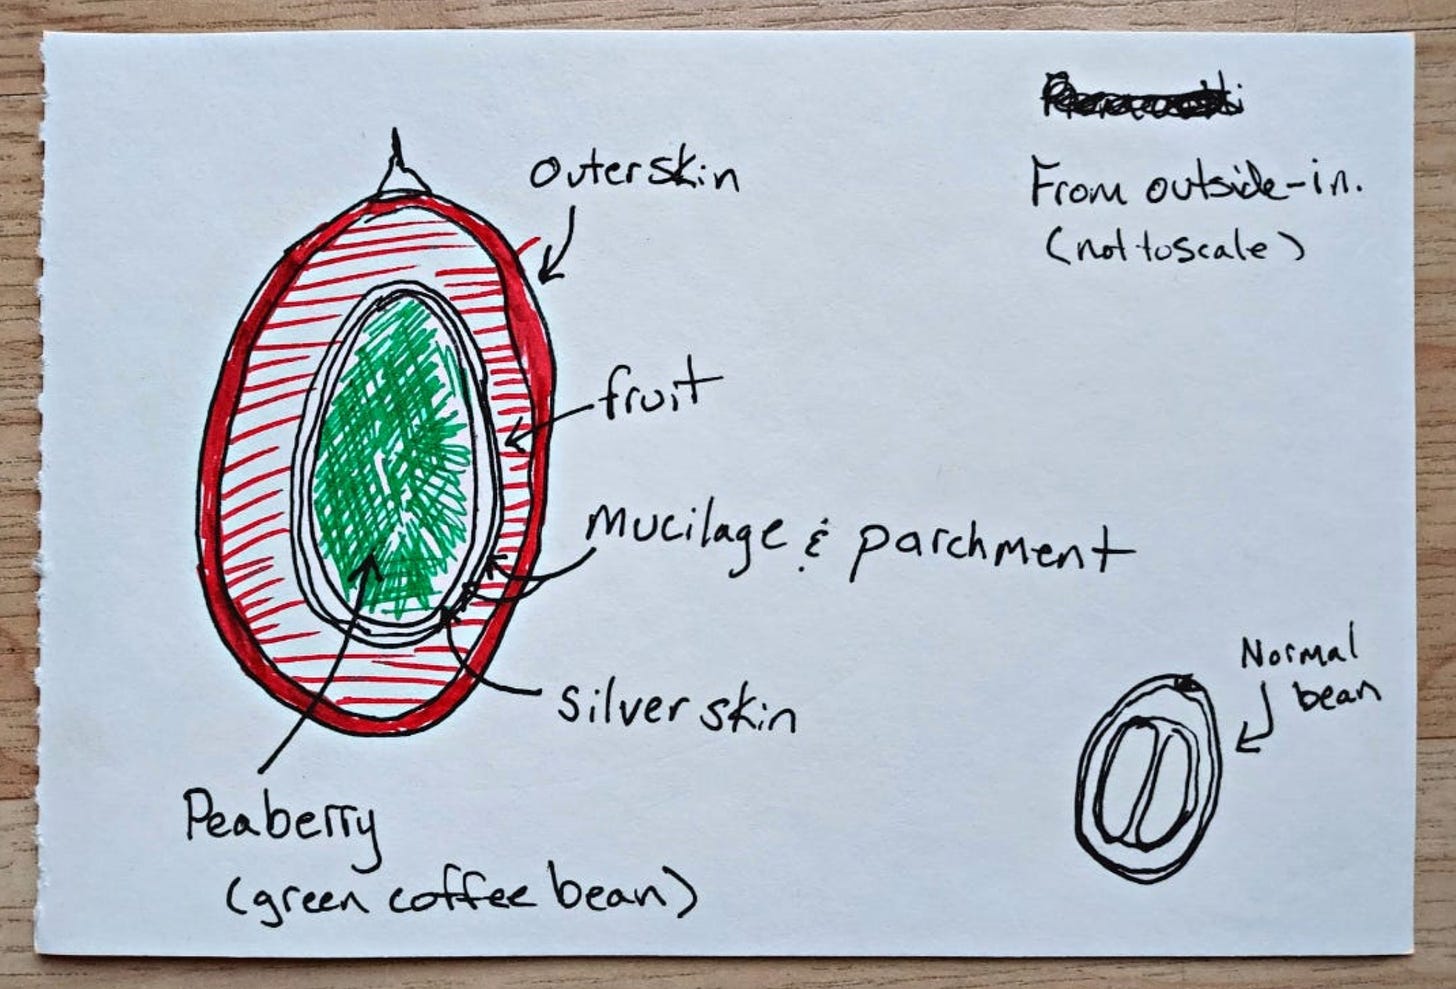 A pen and ink sketch of the layers of a coffee cherry labeled. From the outside-in: Outerskin, Fruit, Mucilage and Parchment, Silver Skin, Green Coffee Seed. 